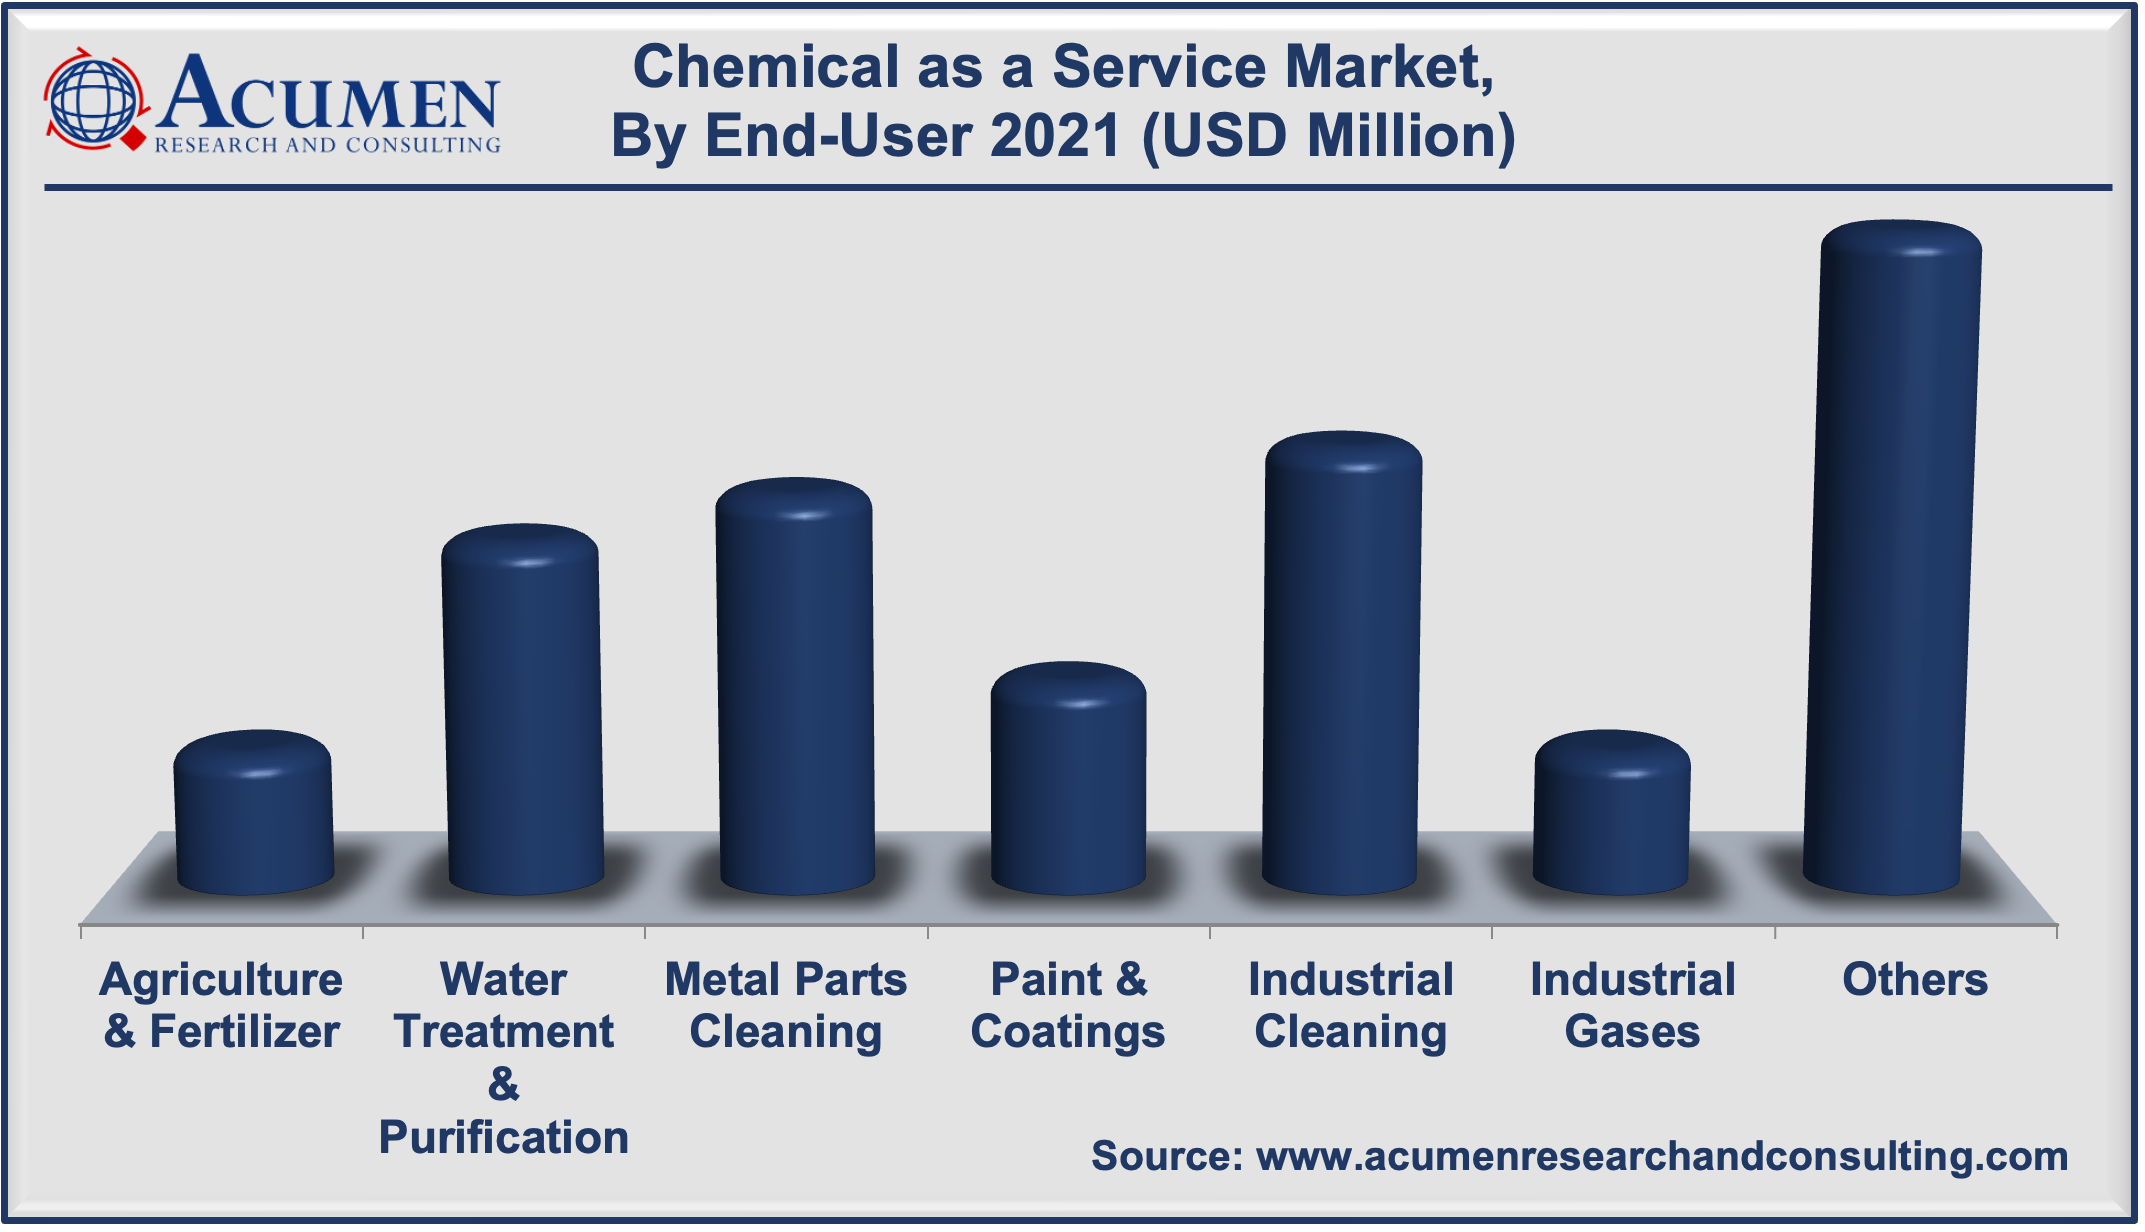 Chemical as a Service Market Share accounted for USD 8,101 Million in 2021 and is estimated to reach the value of USD 15,581 Million by 2030.